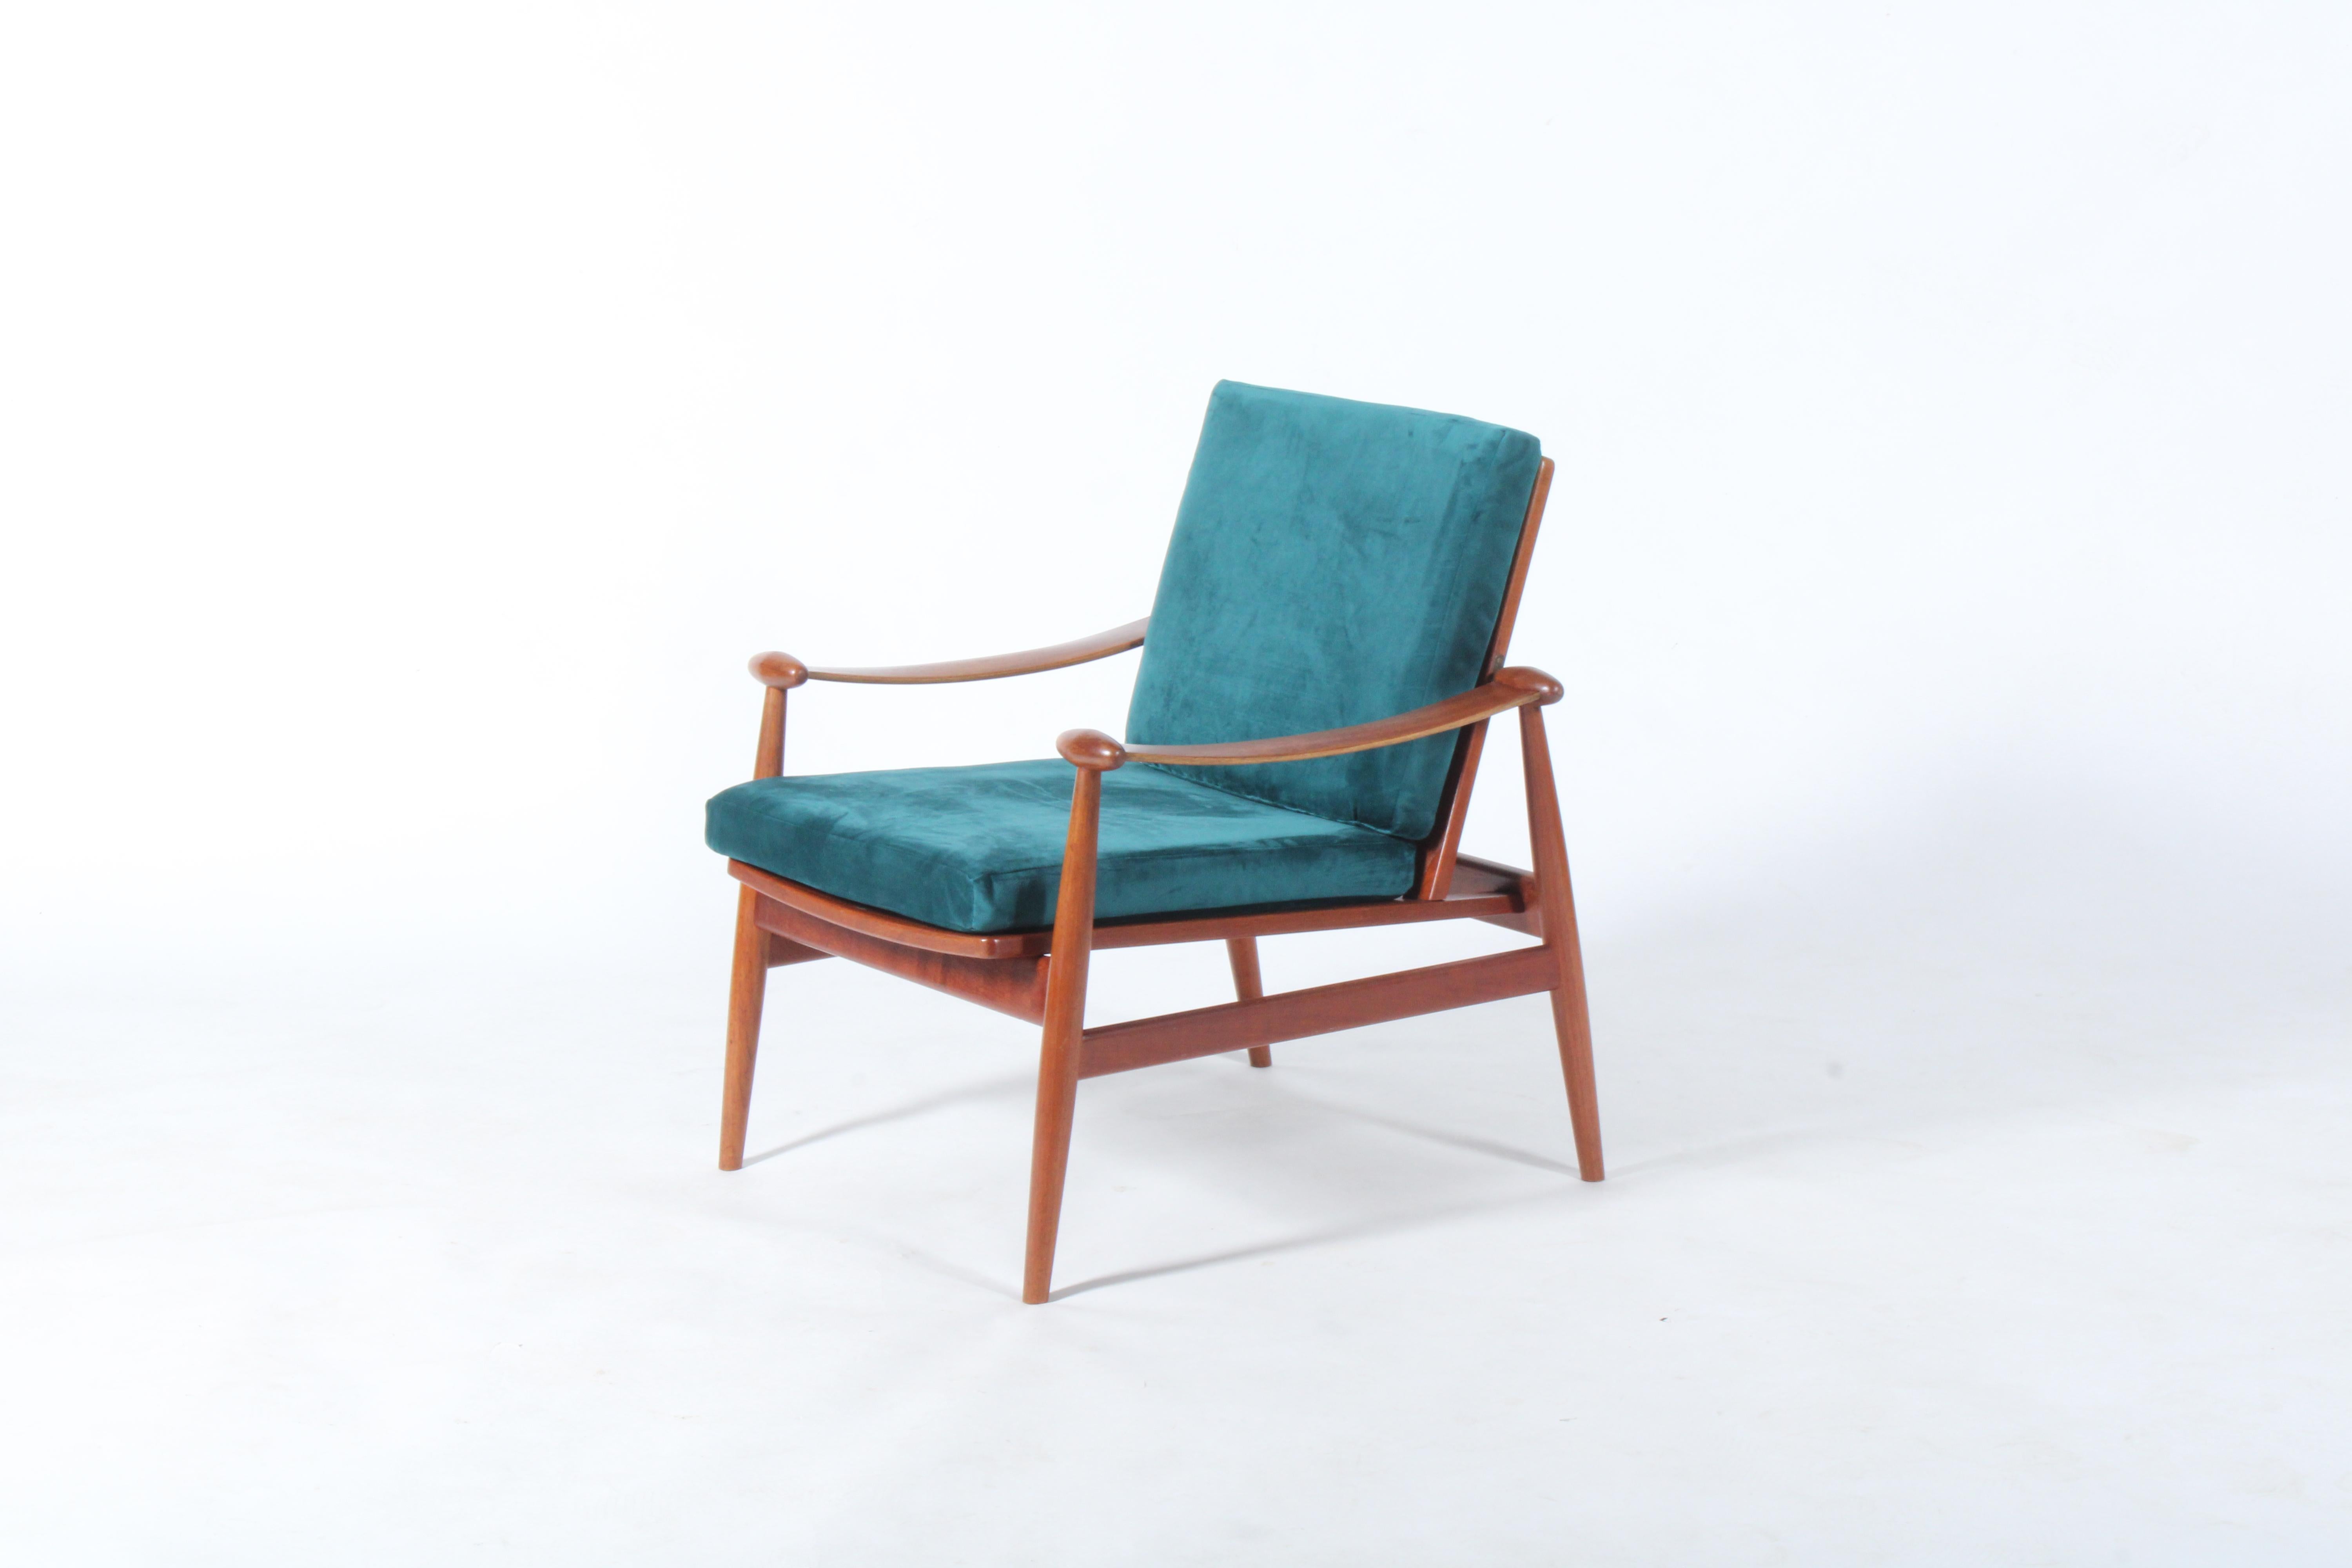 Original and authentic Spade Chair in teak wood by the legendary Danish designer Finn Juhl manufactured by France and Daverkosen circa 1950.  This piece is in superb condition having under gone a professional restoration with newly upholstered